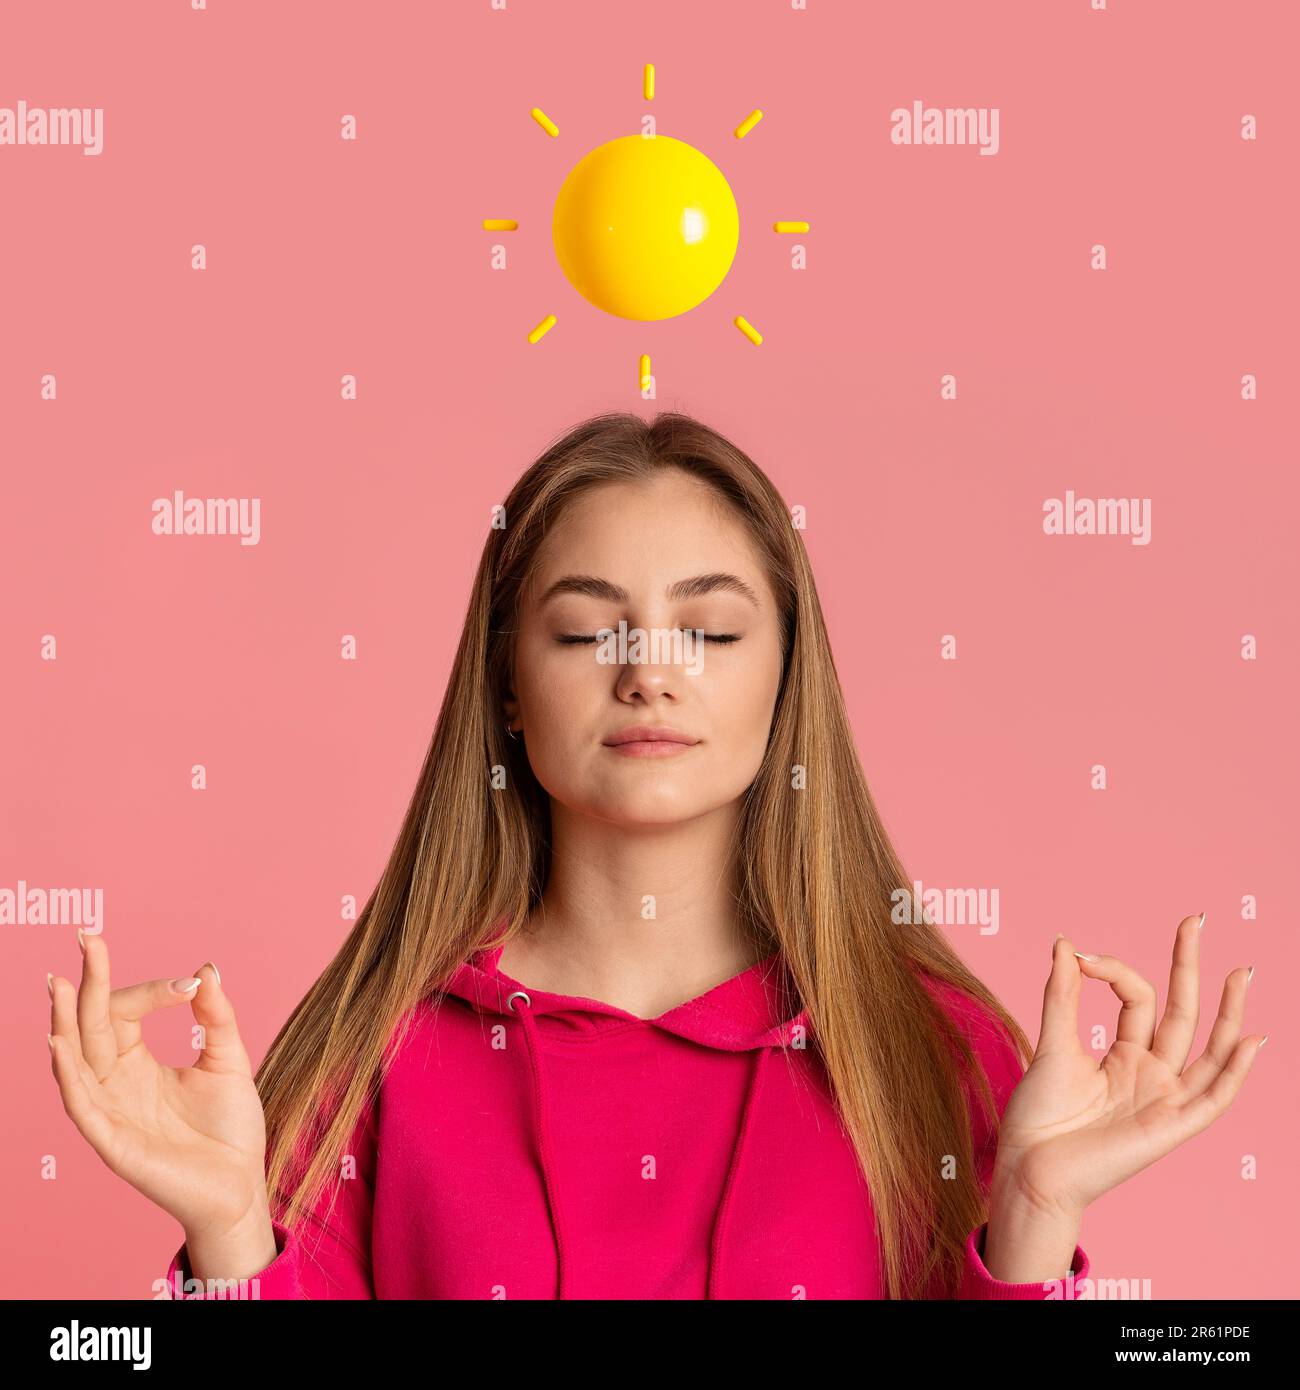 Keep Calm. Woman With Sun Emoji Above Head Meditating On Pink Background Stock Photo